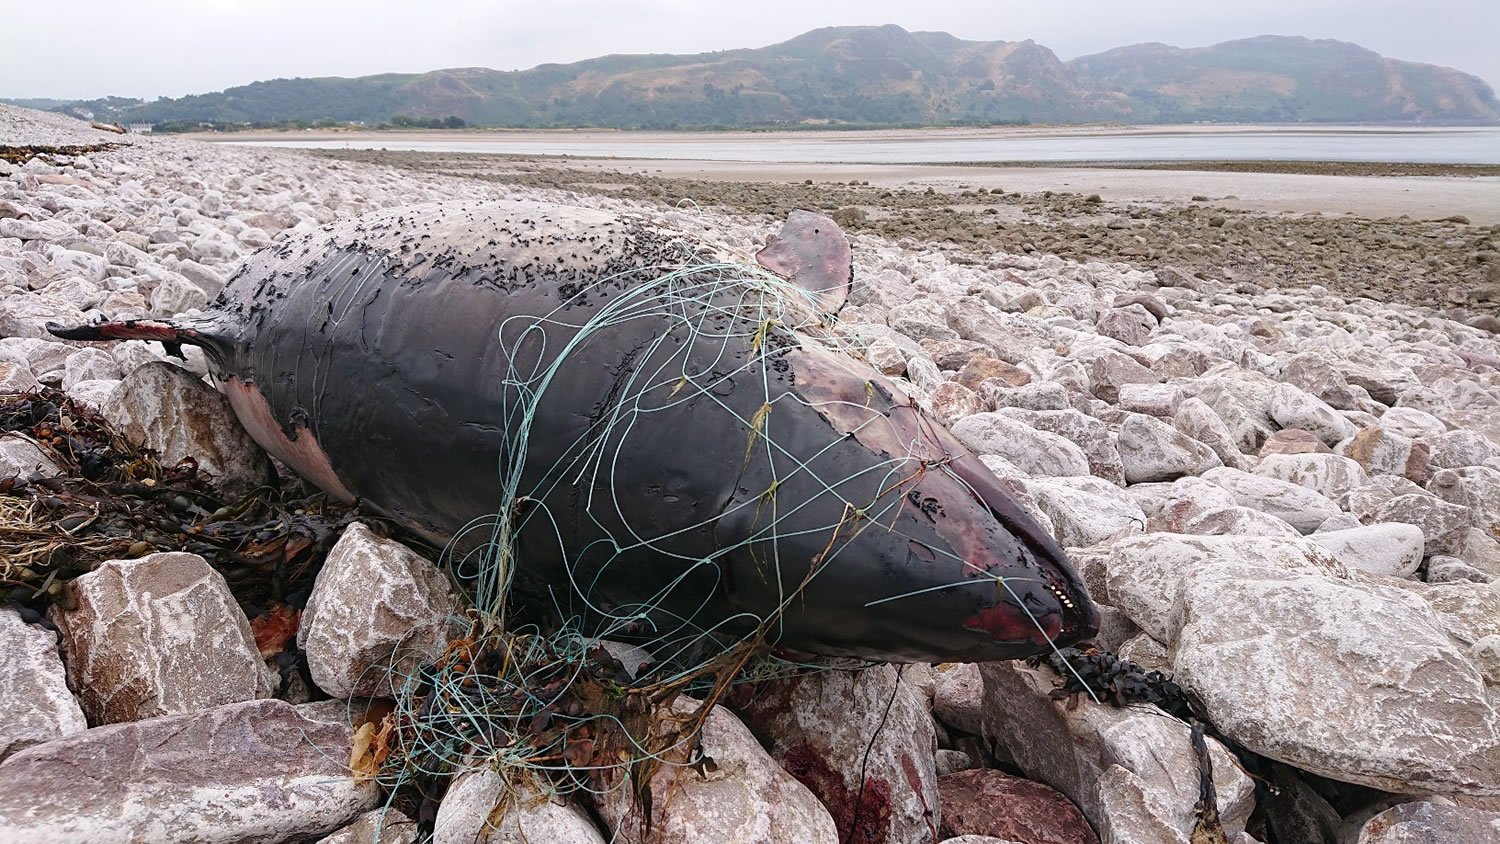 Harbour porpoise found on beach, Conwy, Wales